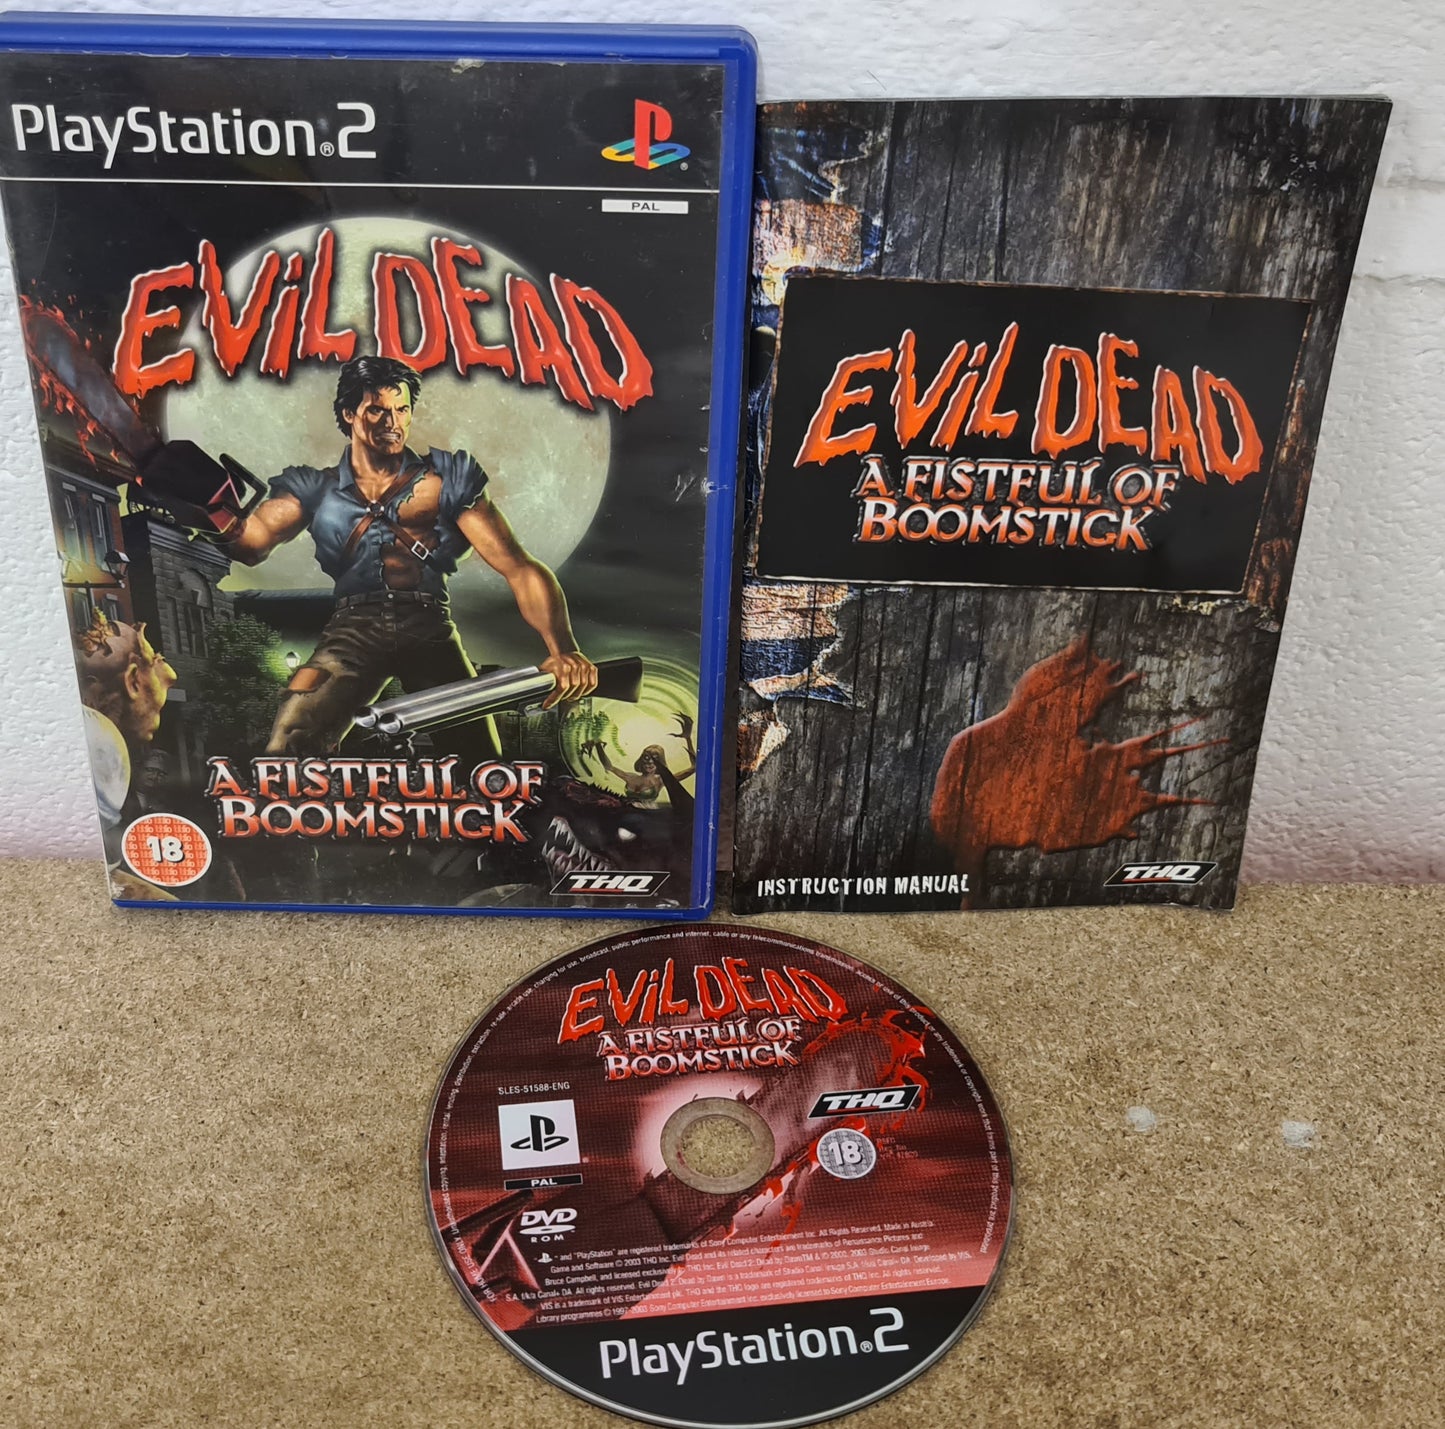 Evil Dead: A fistful of Boomstick Sony Playstation 2 (PS2) Game